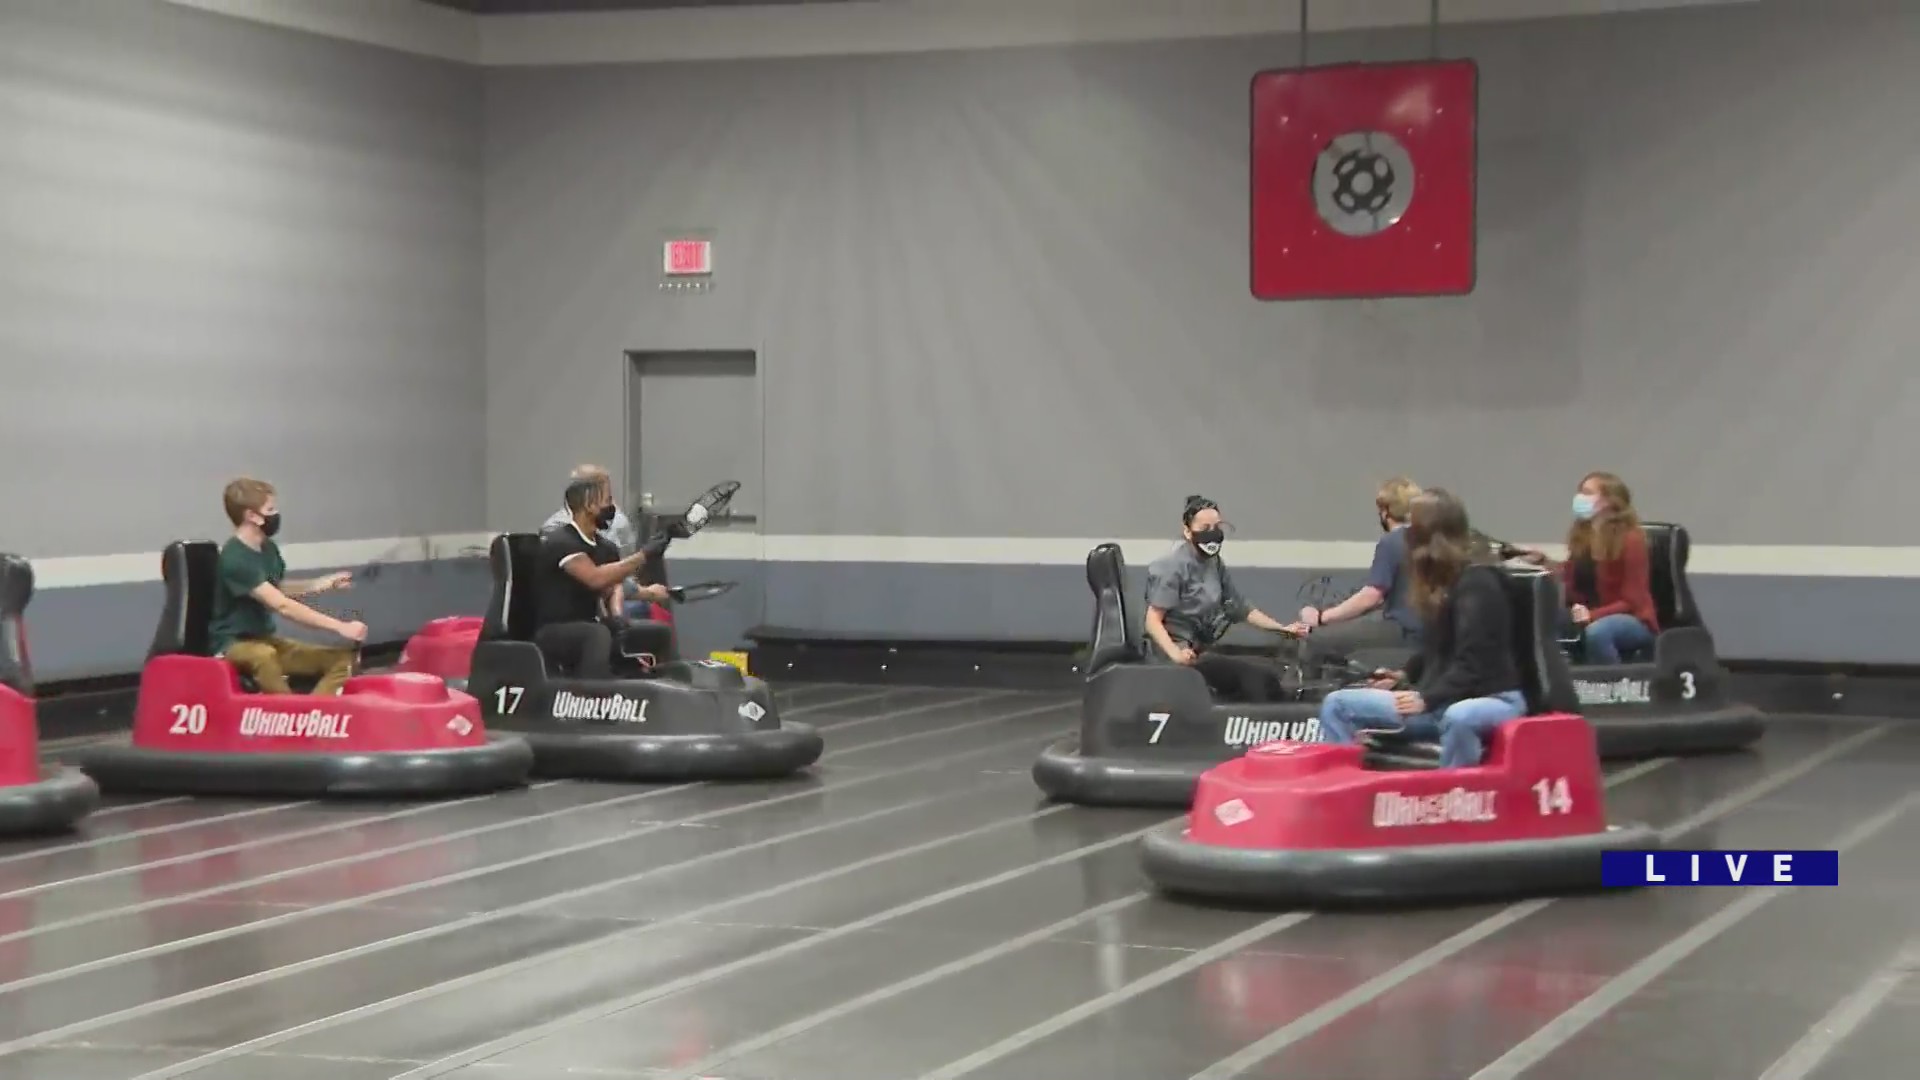 Around Town visits Whirlyball in Naperville